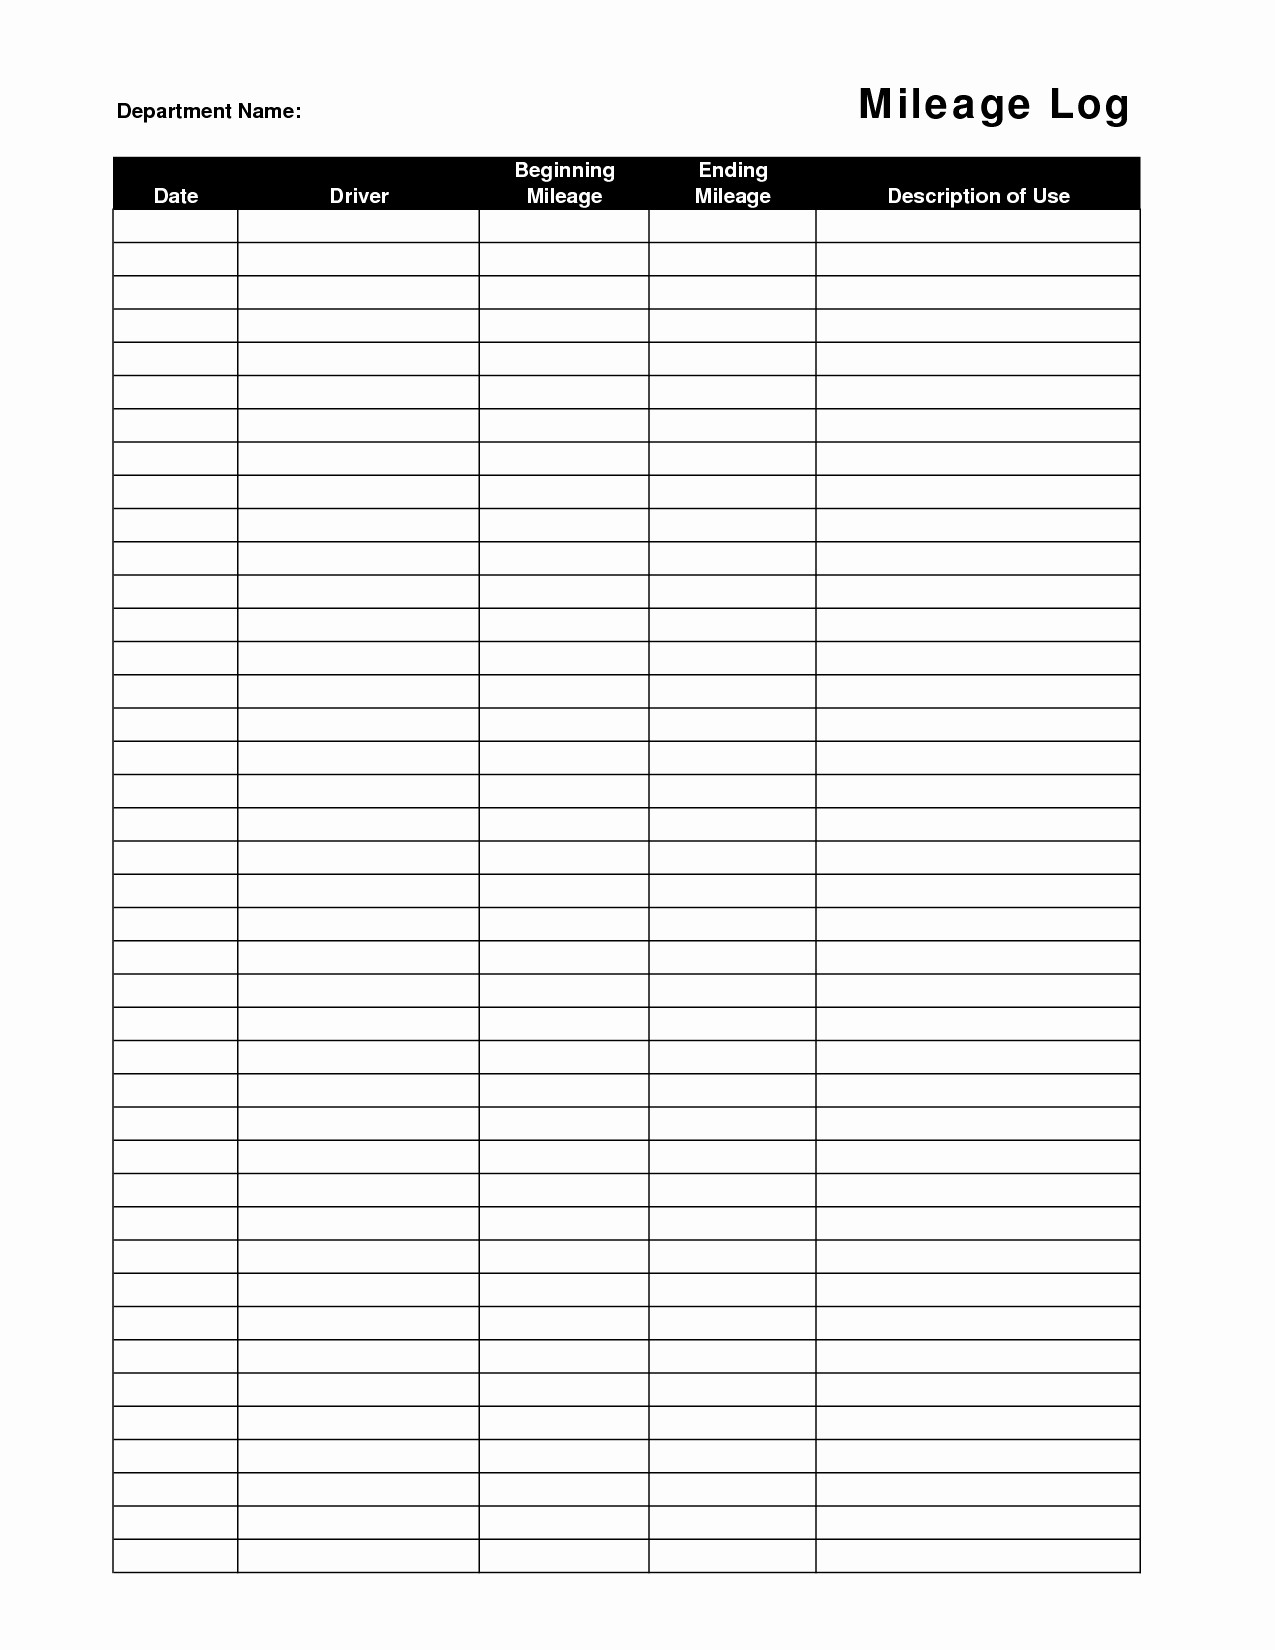 Mileage Log Template For Self Employed New Business Expense Document